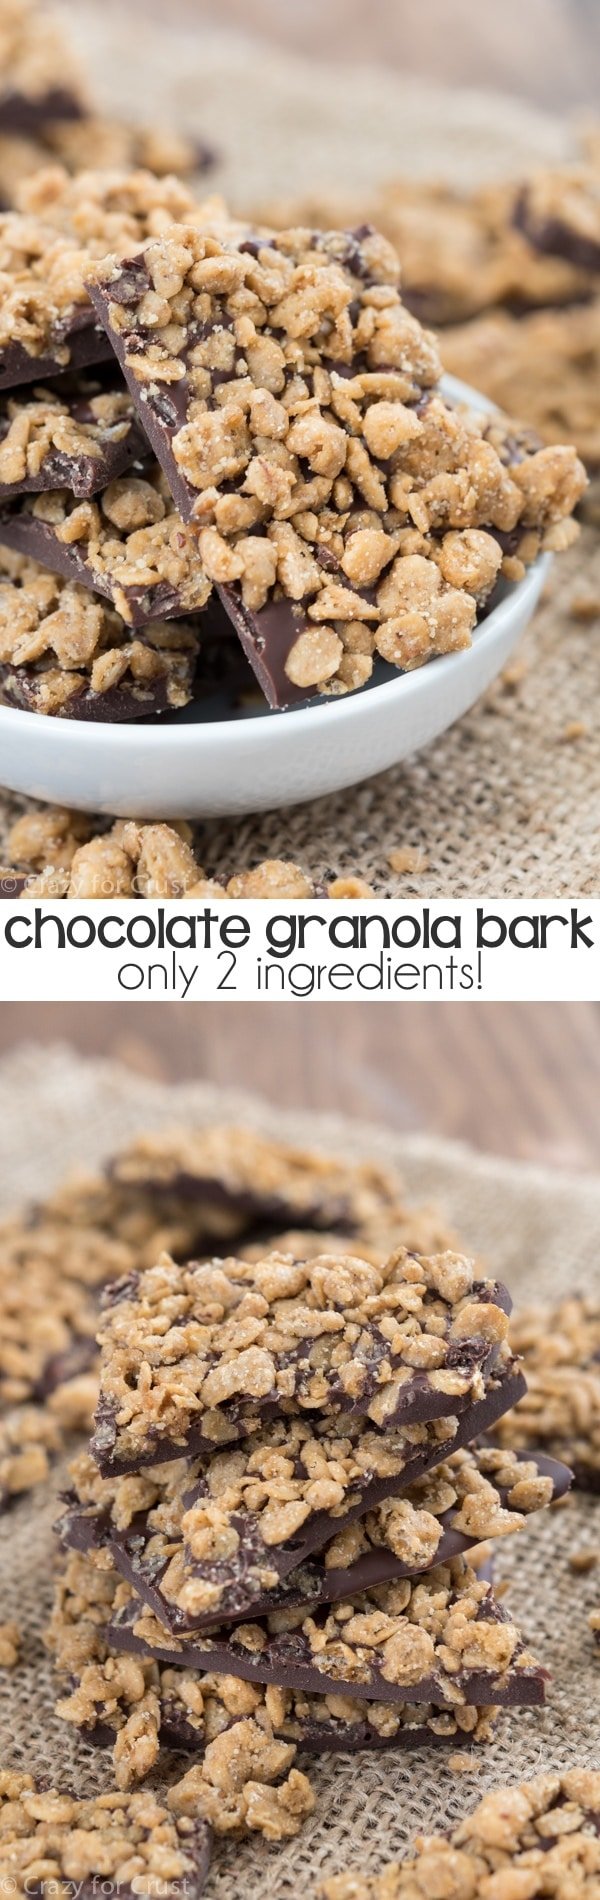 Easy 2 ingredient Chocolate Granola Bark made with chocolate and your favorite granola!